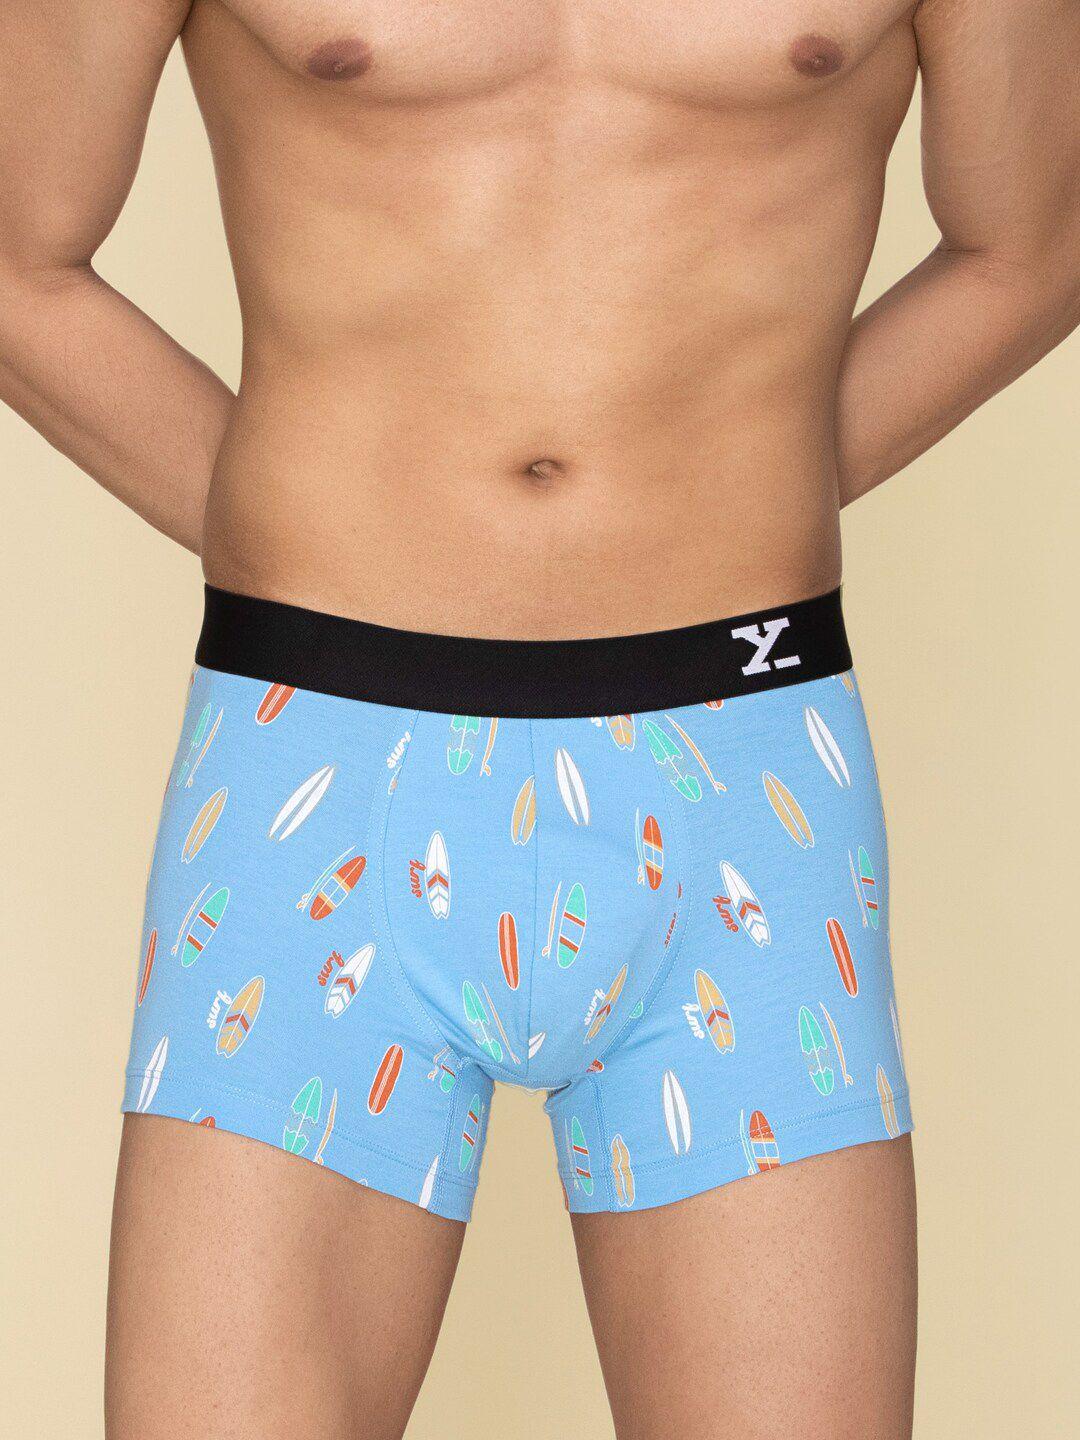 xyxx-printed-cotton-trunk-xytrnk203